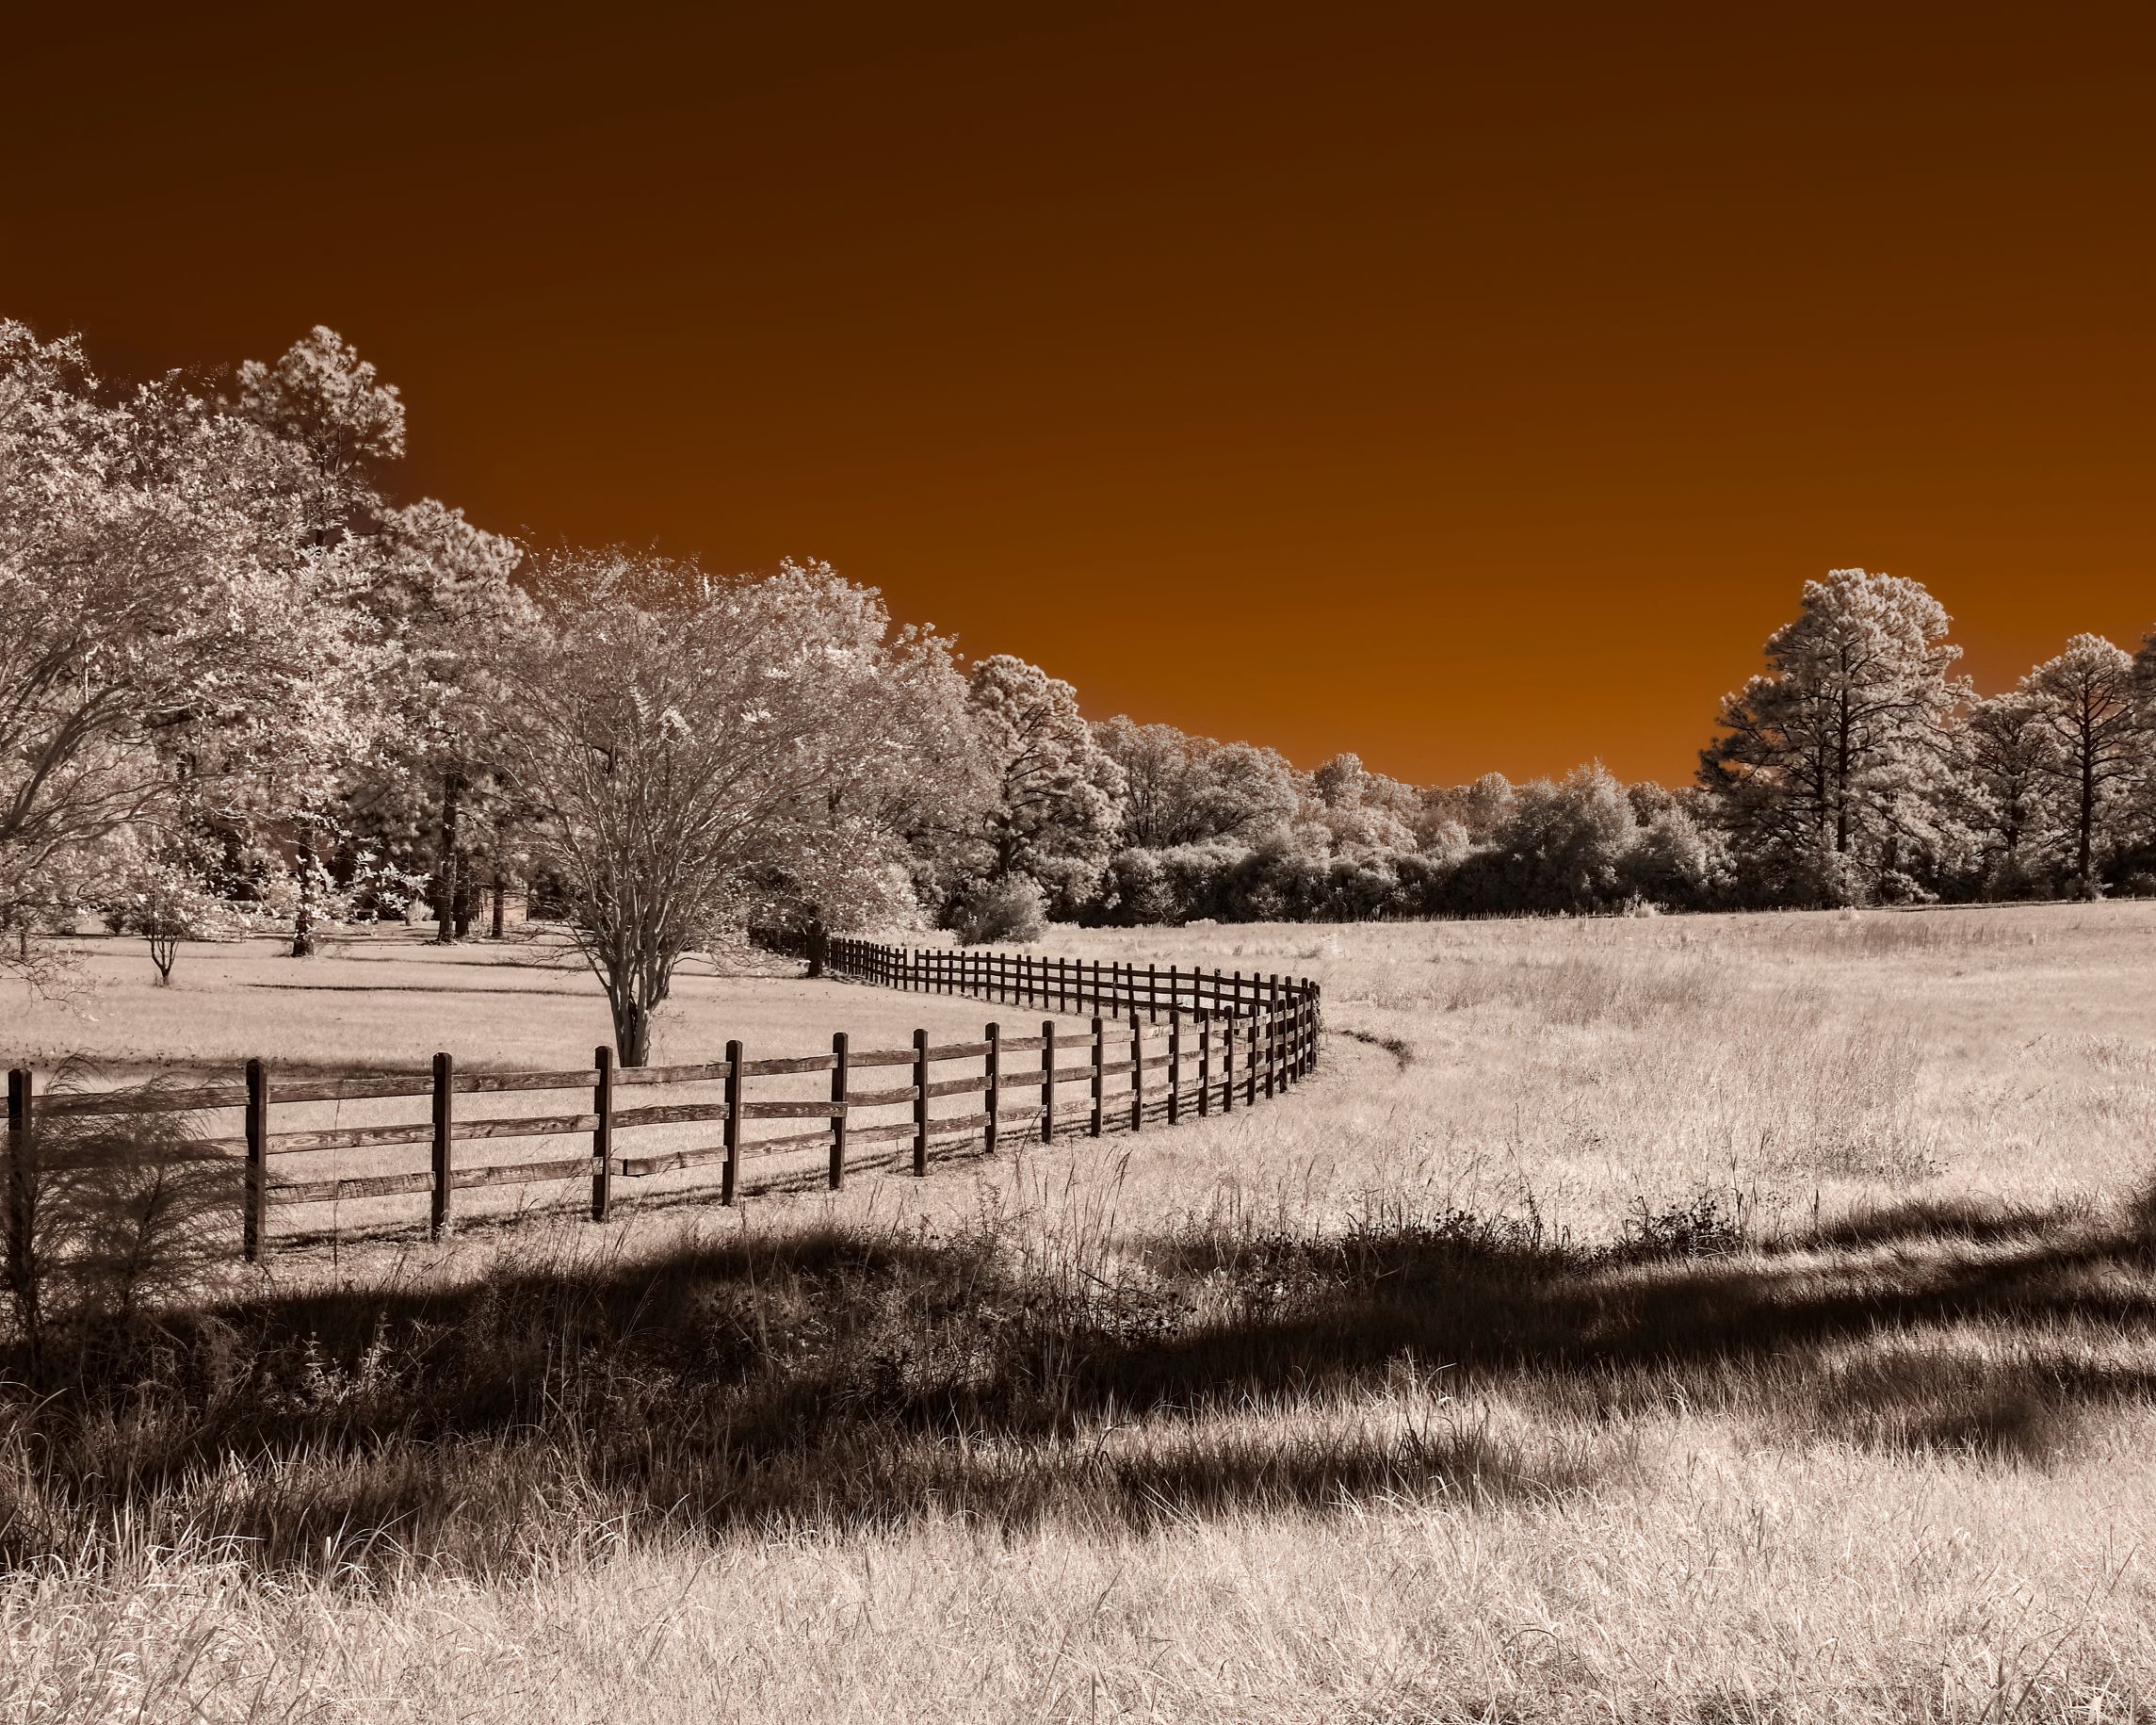 9.30.22 Infrared Ranch Timber Fence 3865 5 4 18.25 x 14.60 reduced file size a275cdc6 ee17 4e12 95e9 f1b62740569f